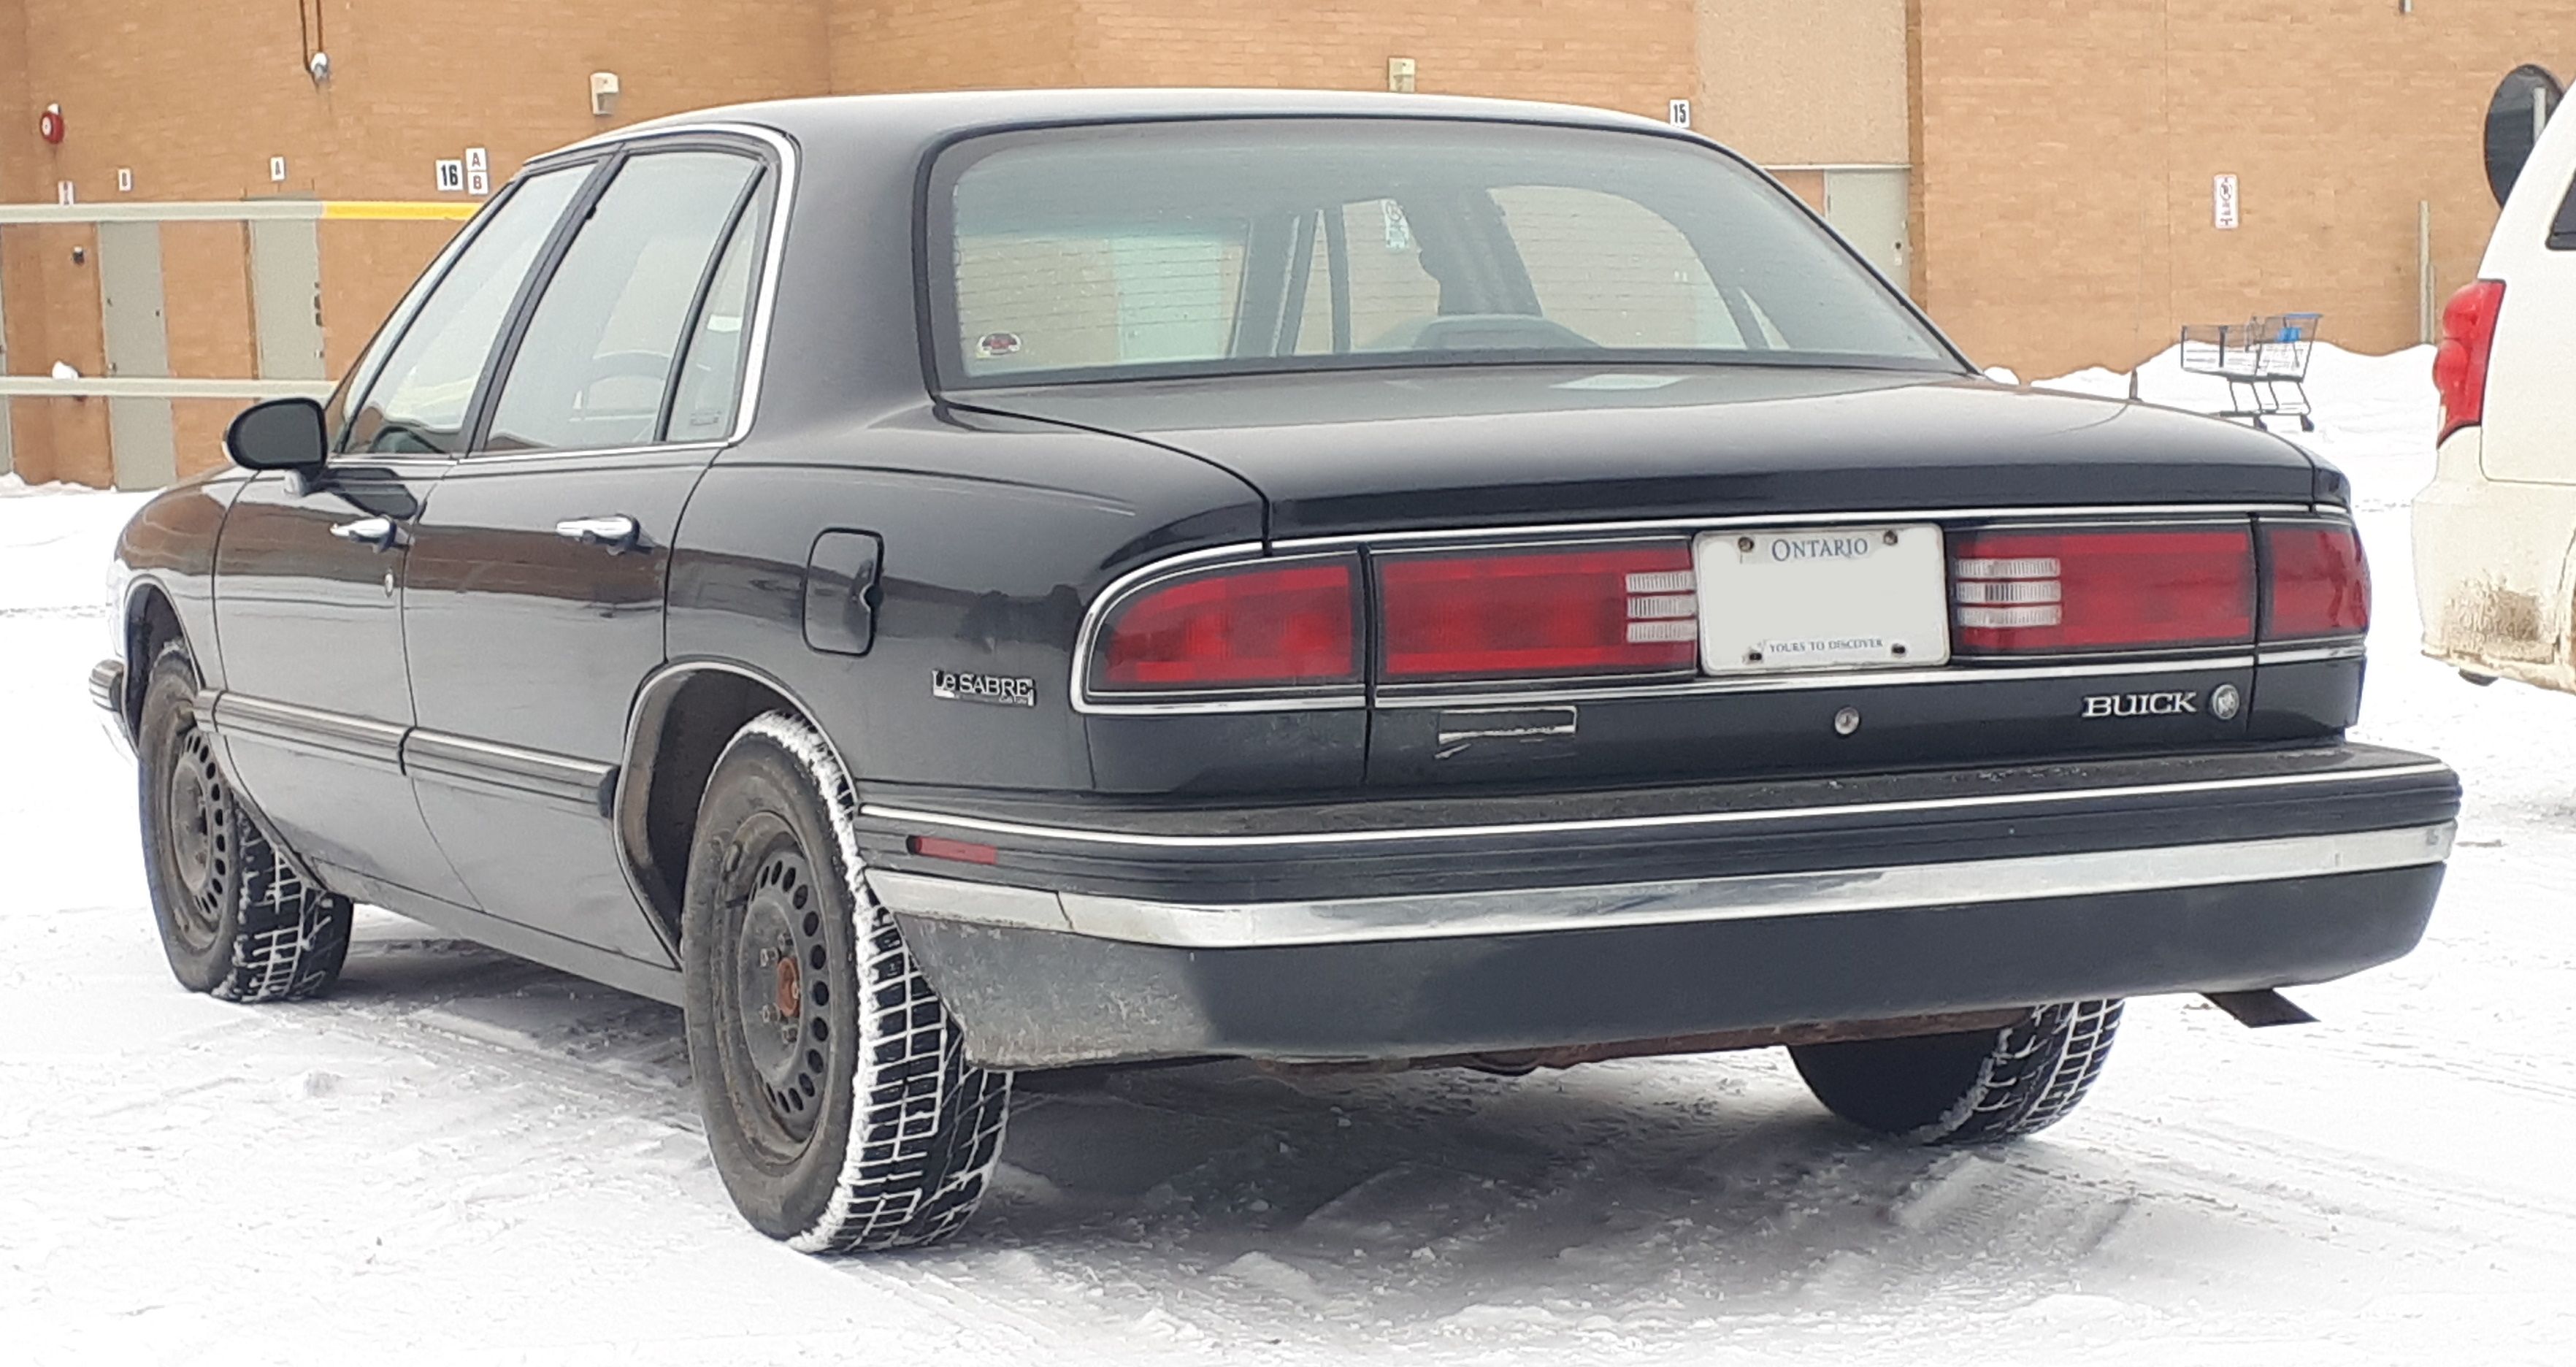 A '90s Buick LeSabre in black.